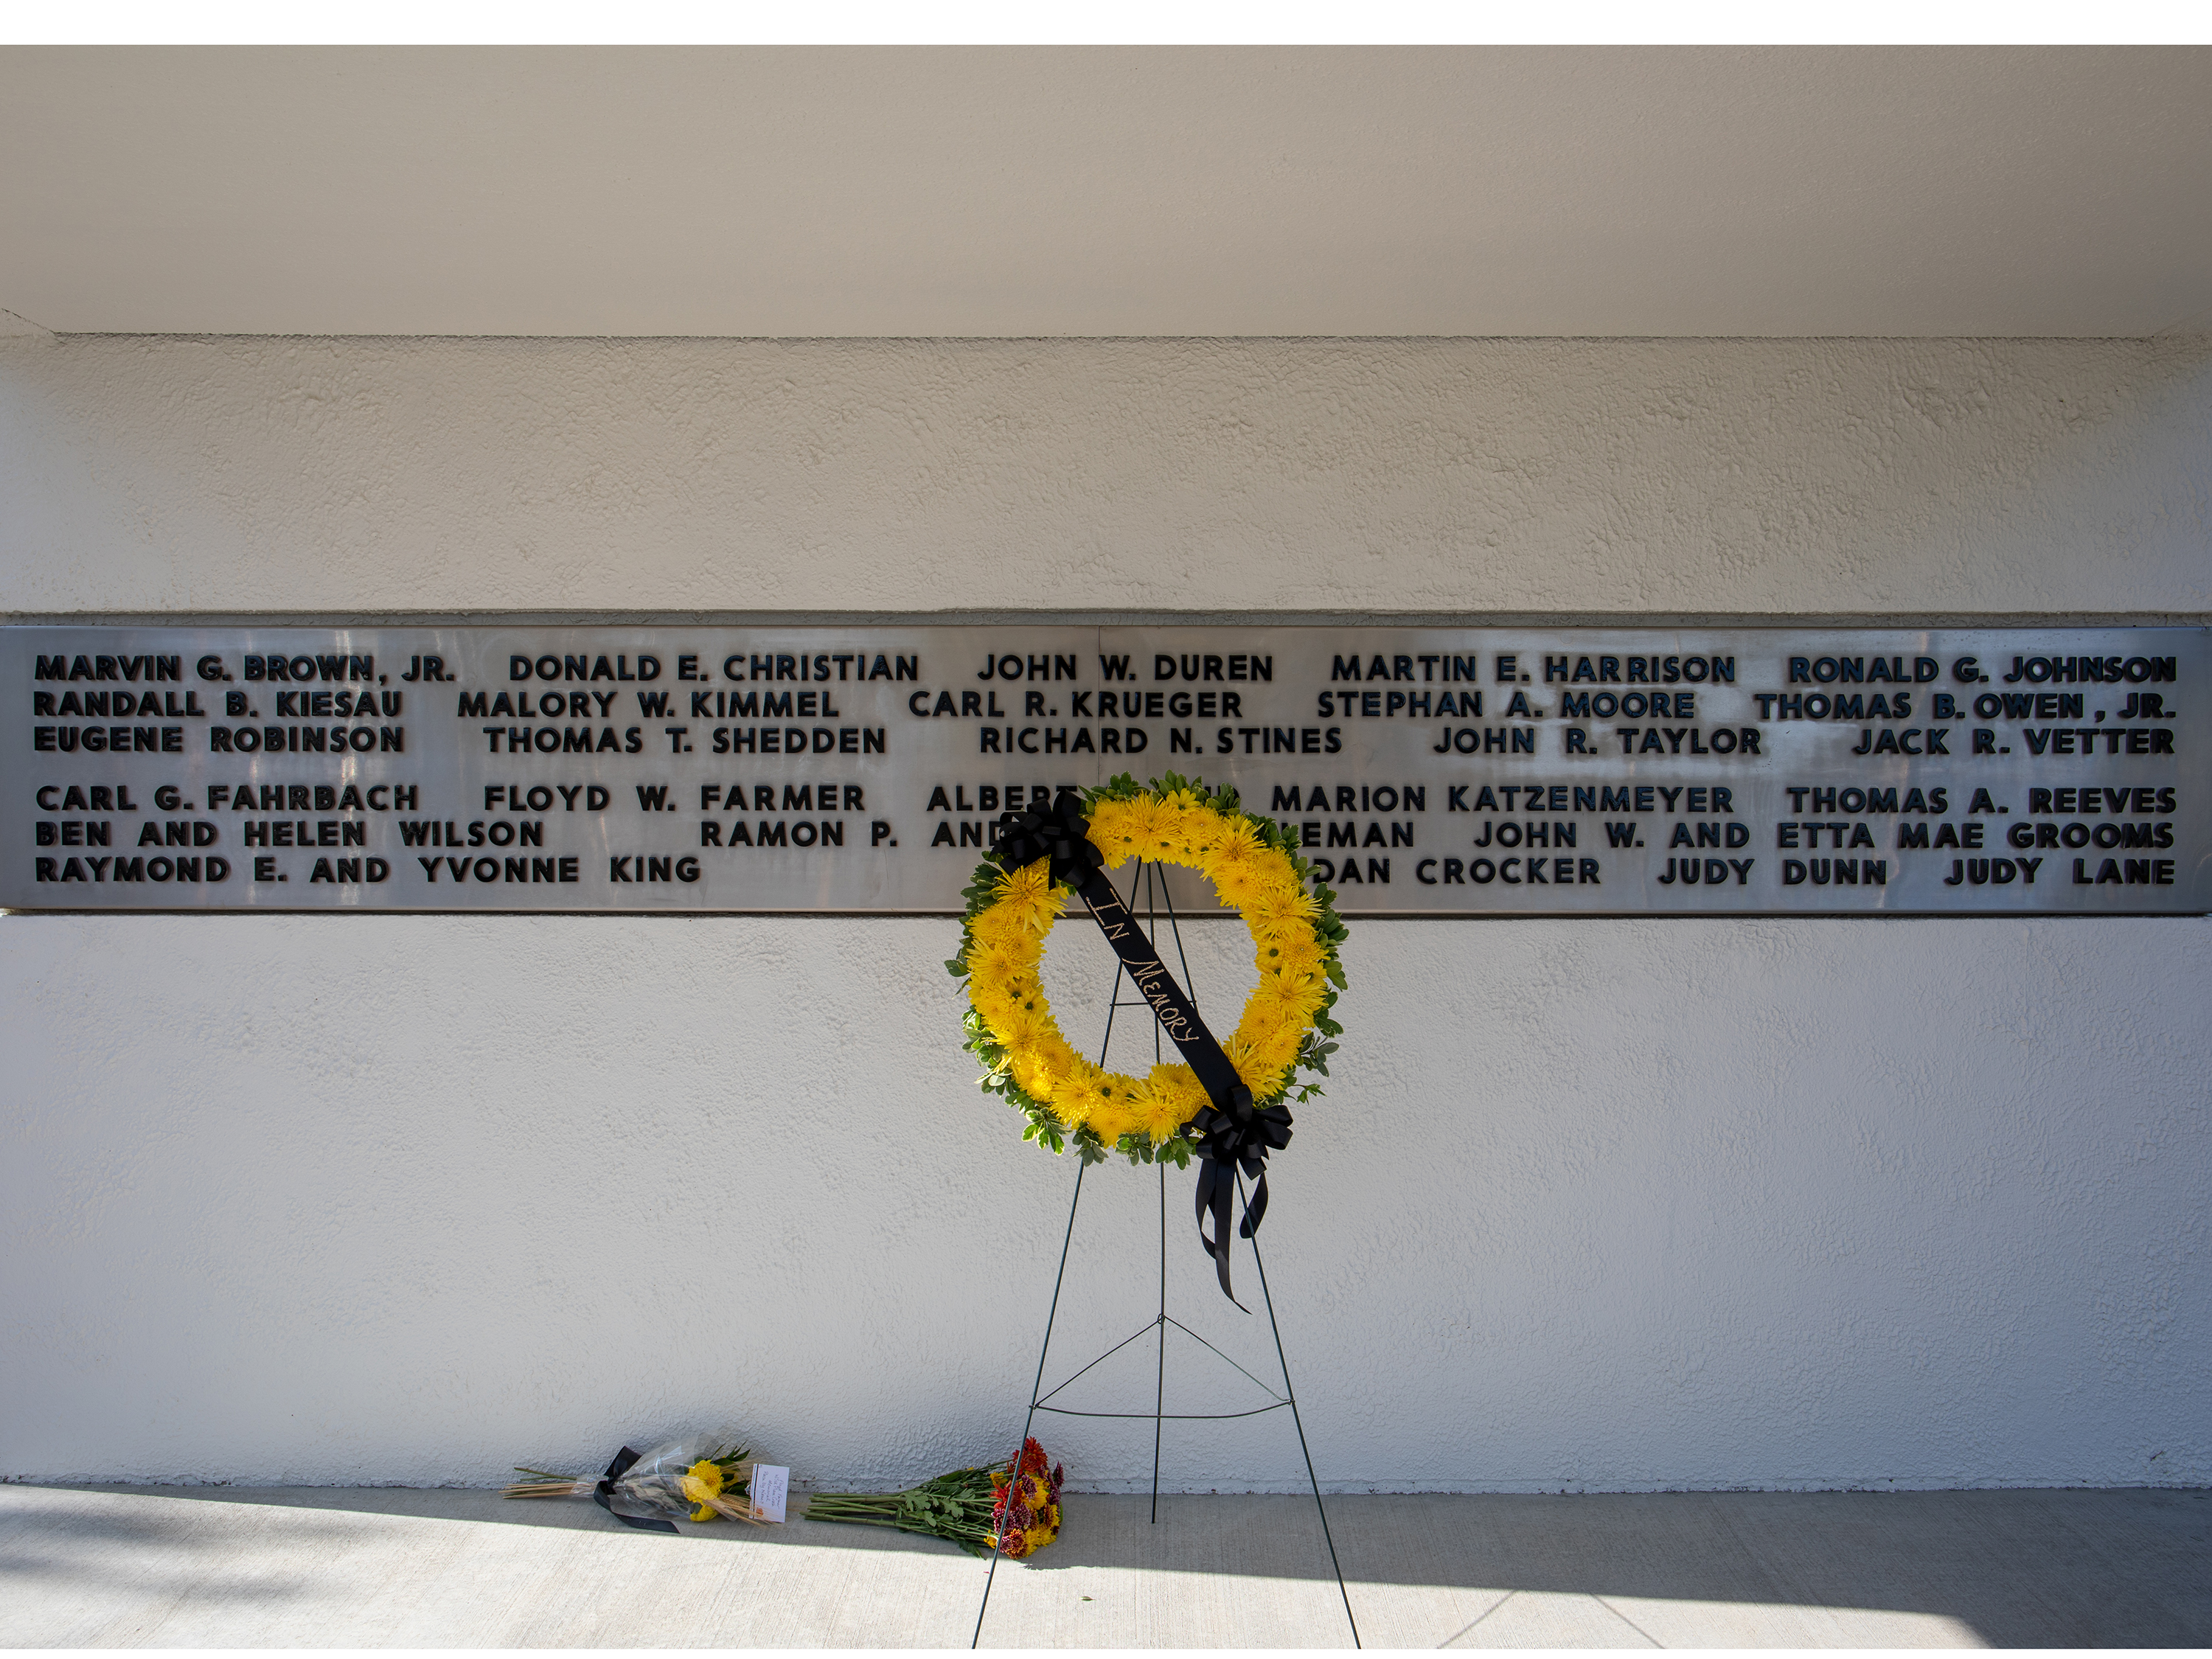 Names of lives lost in the crash on Oct. 2, 1970 are displayed on Memorial '70, located on the Wichita State campus.